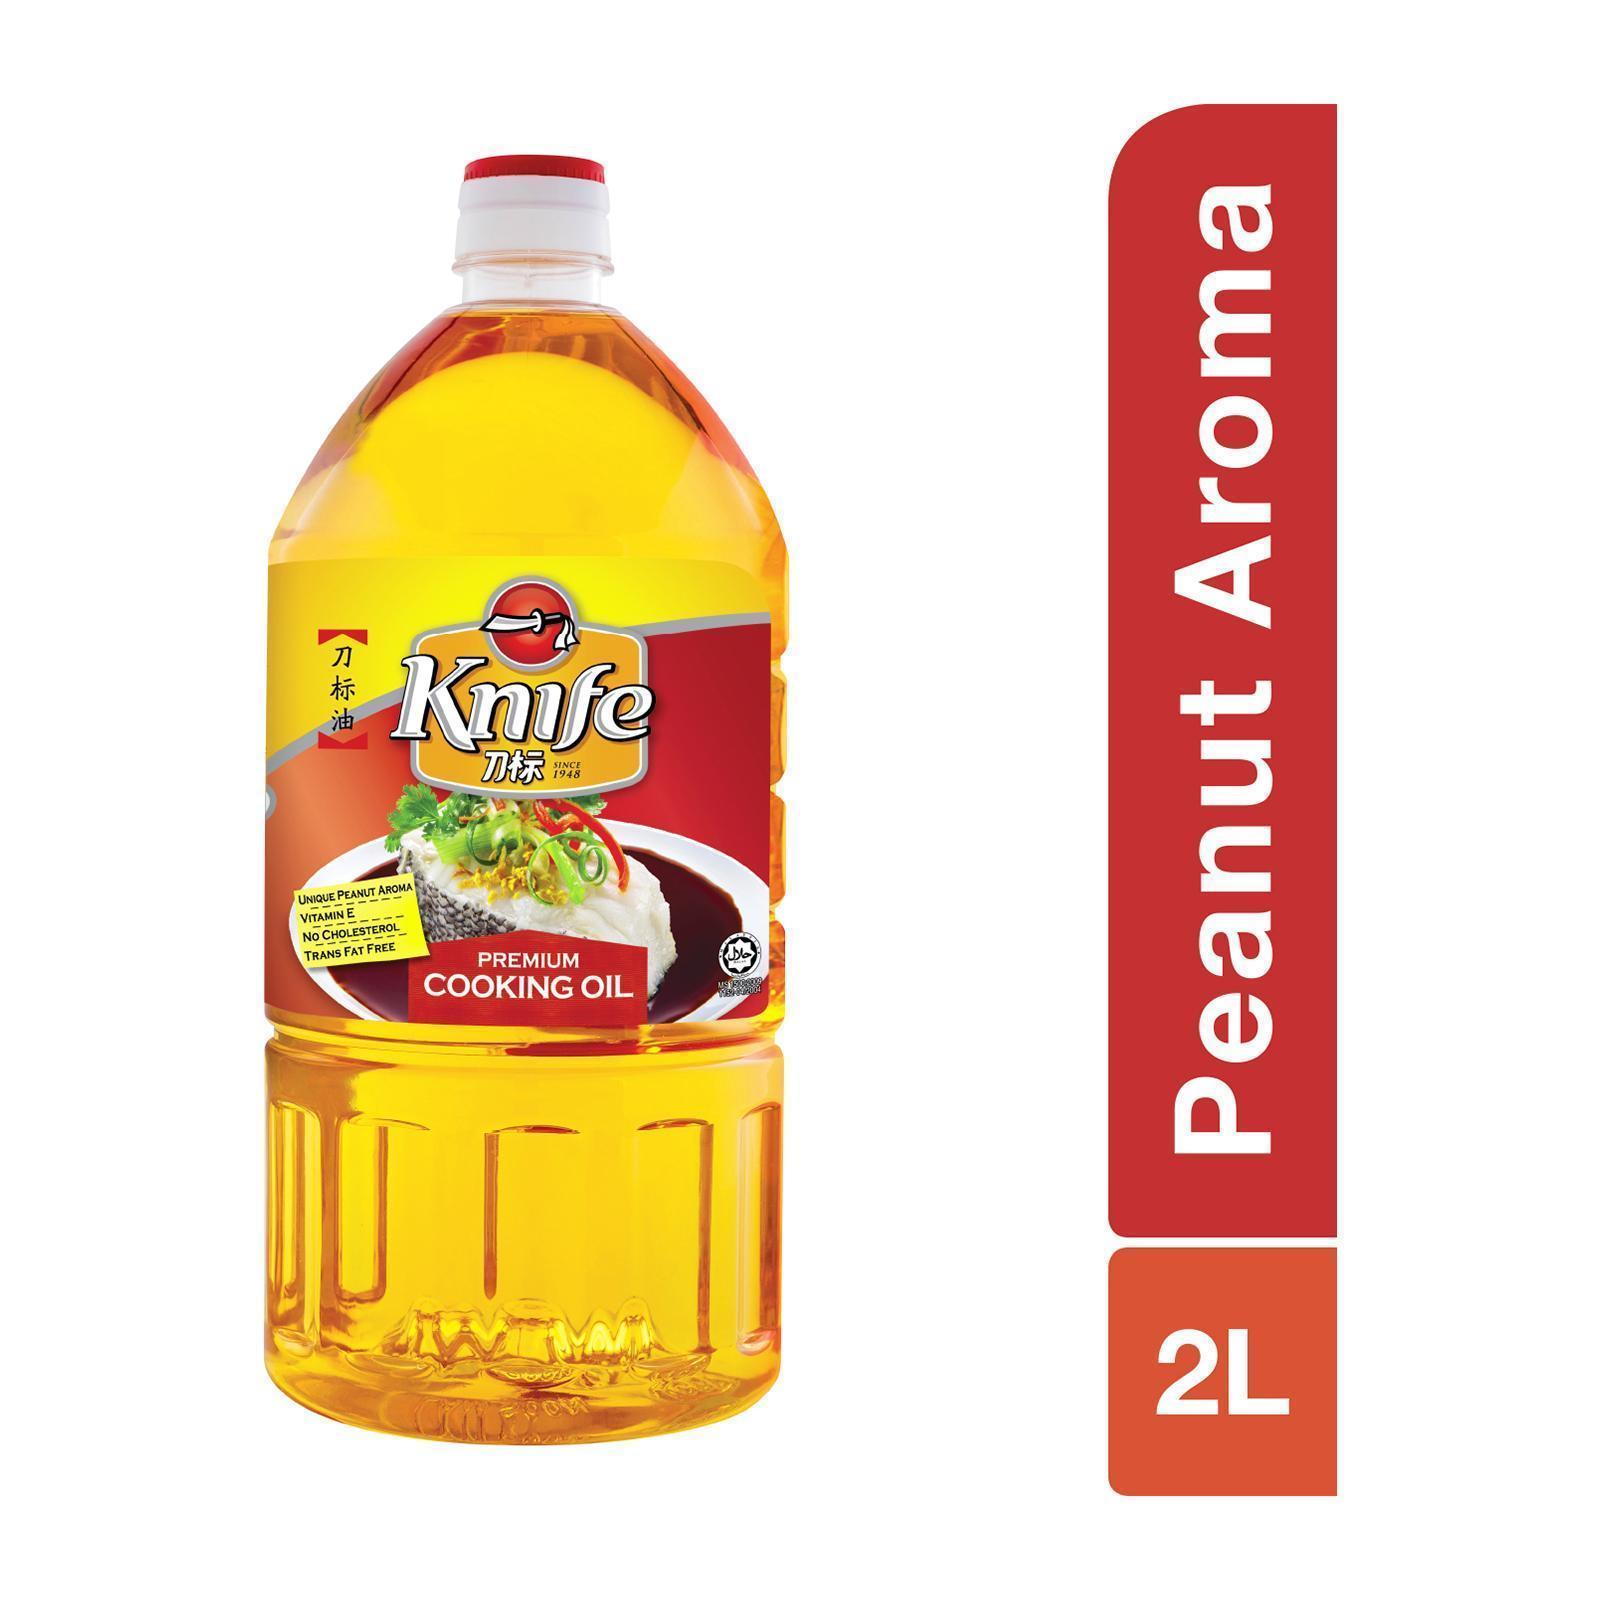 Knife Premium Cooking Oil, 2L : .sg: Grocery